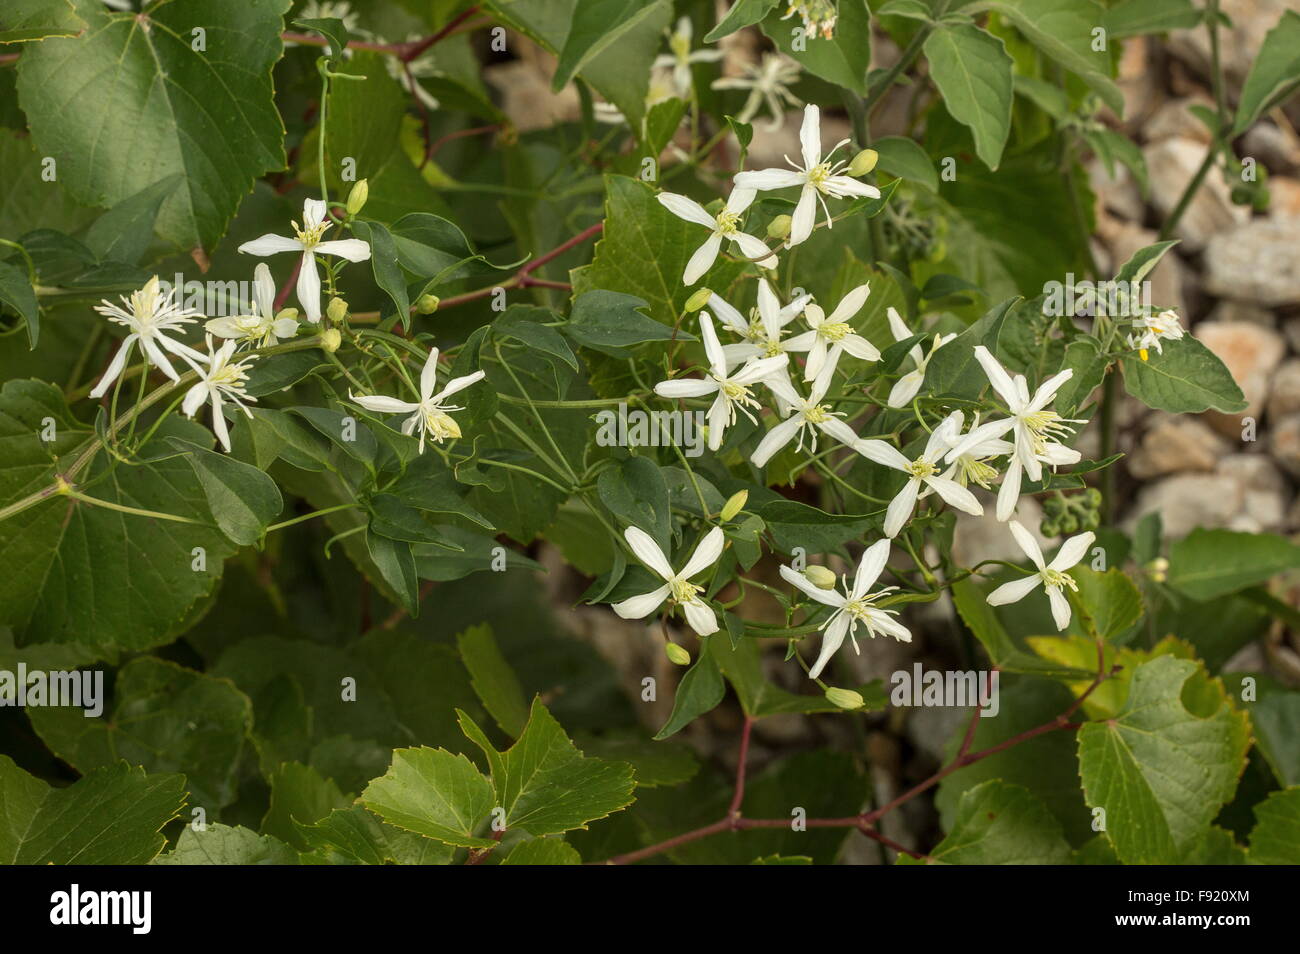 Sweet-scented virgin's bower, Clematis flammula, in flower in garrigue, south France. Stock Photo